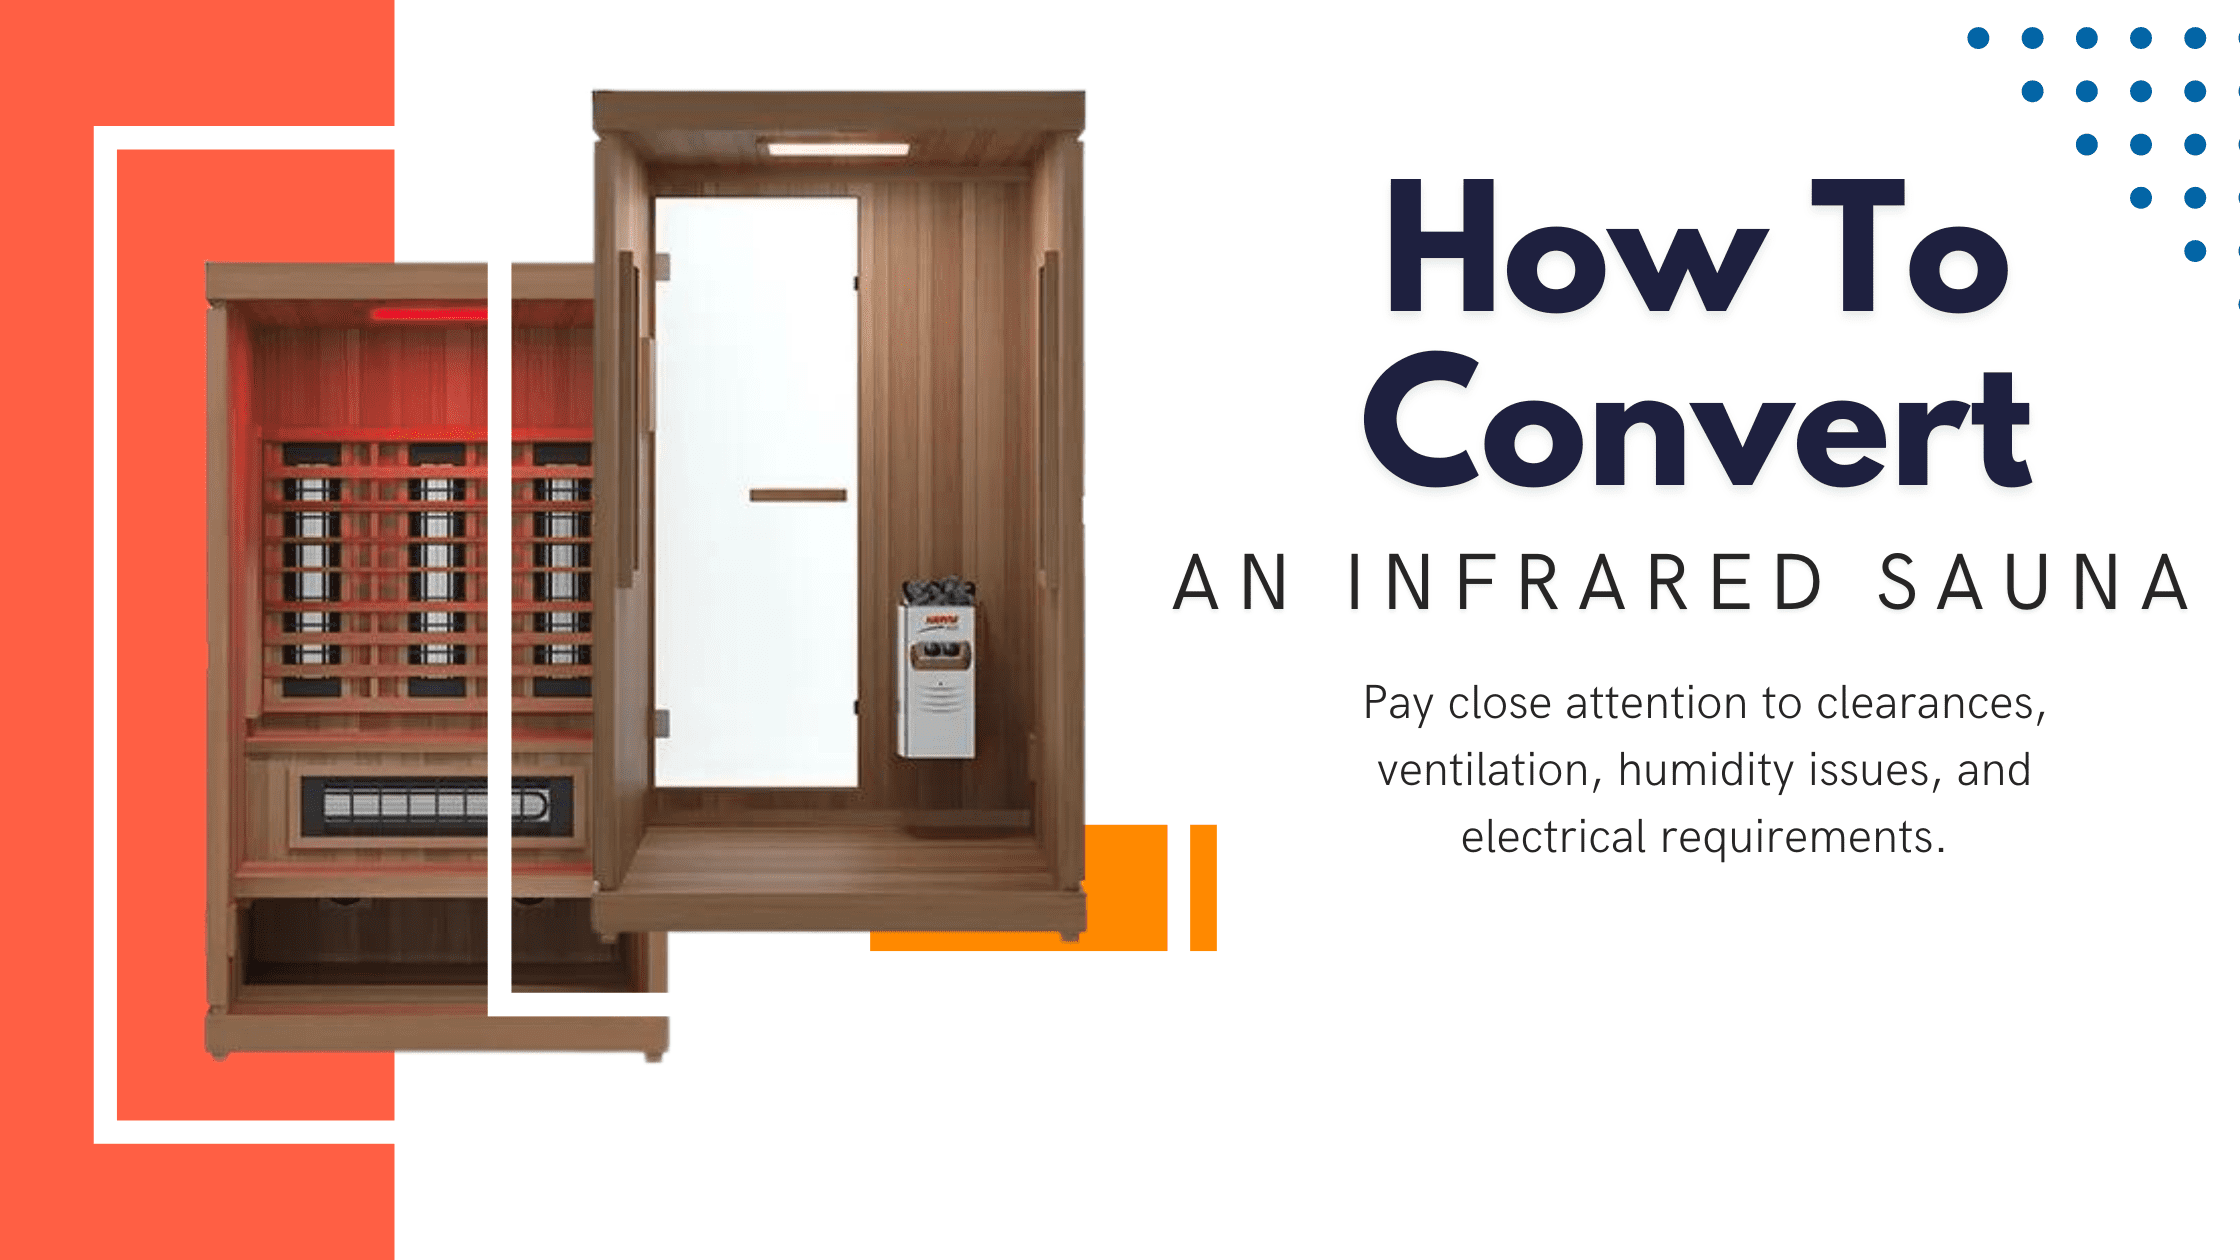 How To Convert an infrared sauna to traditional